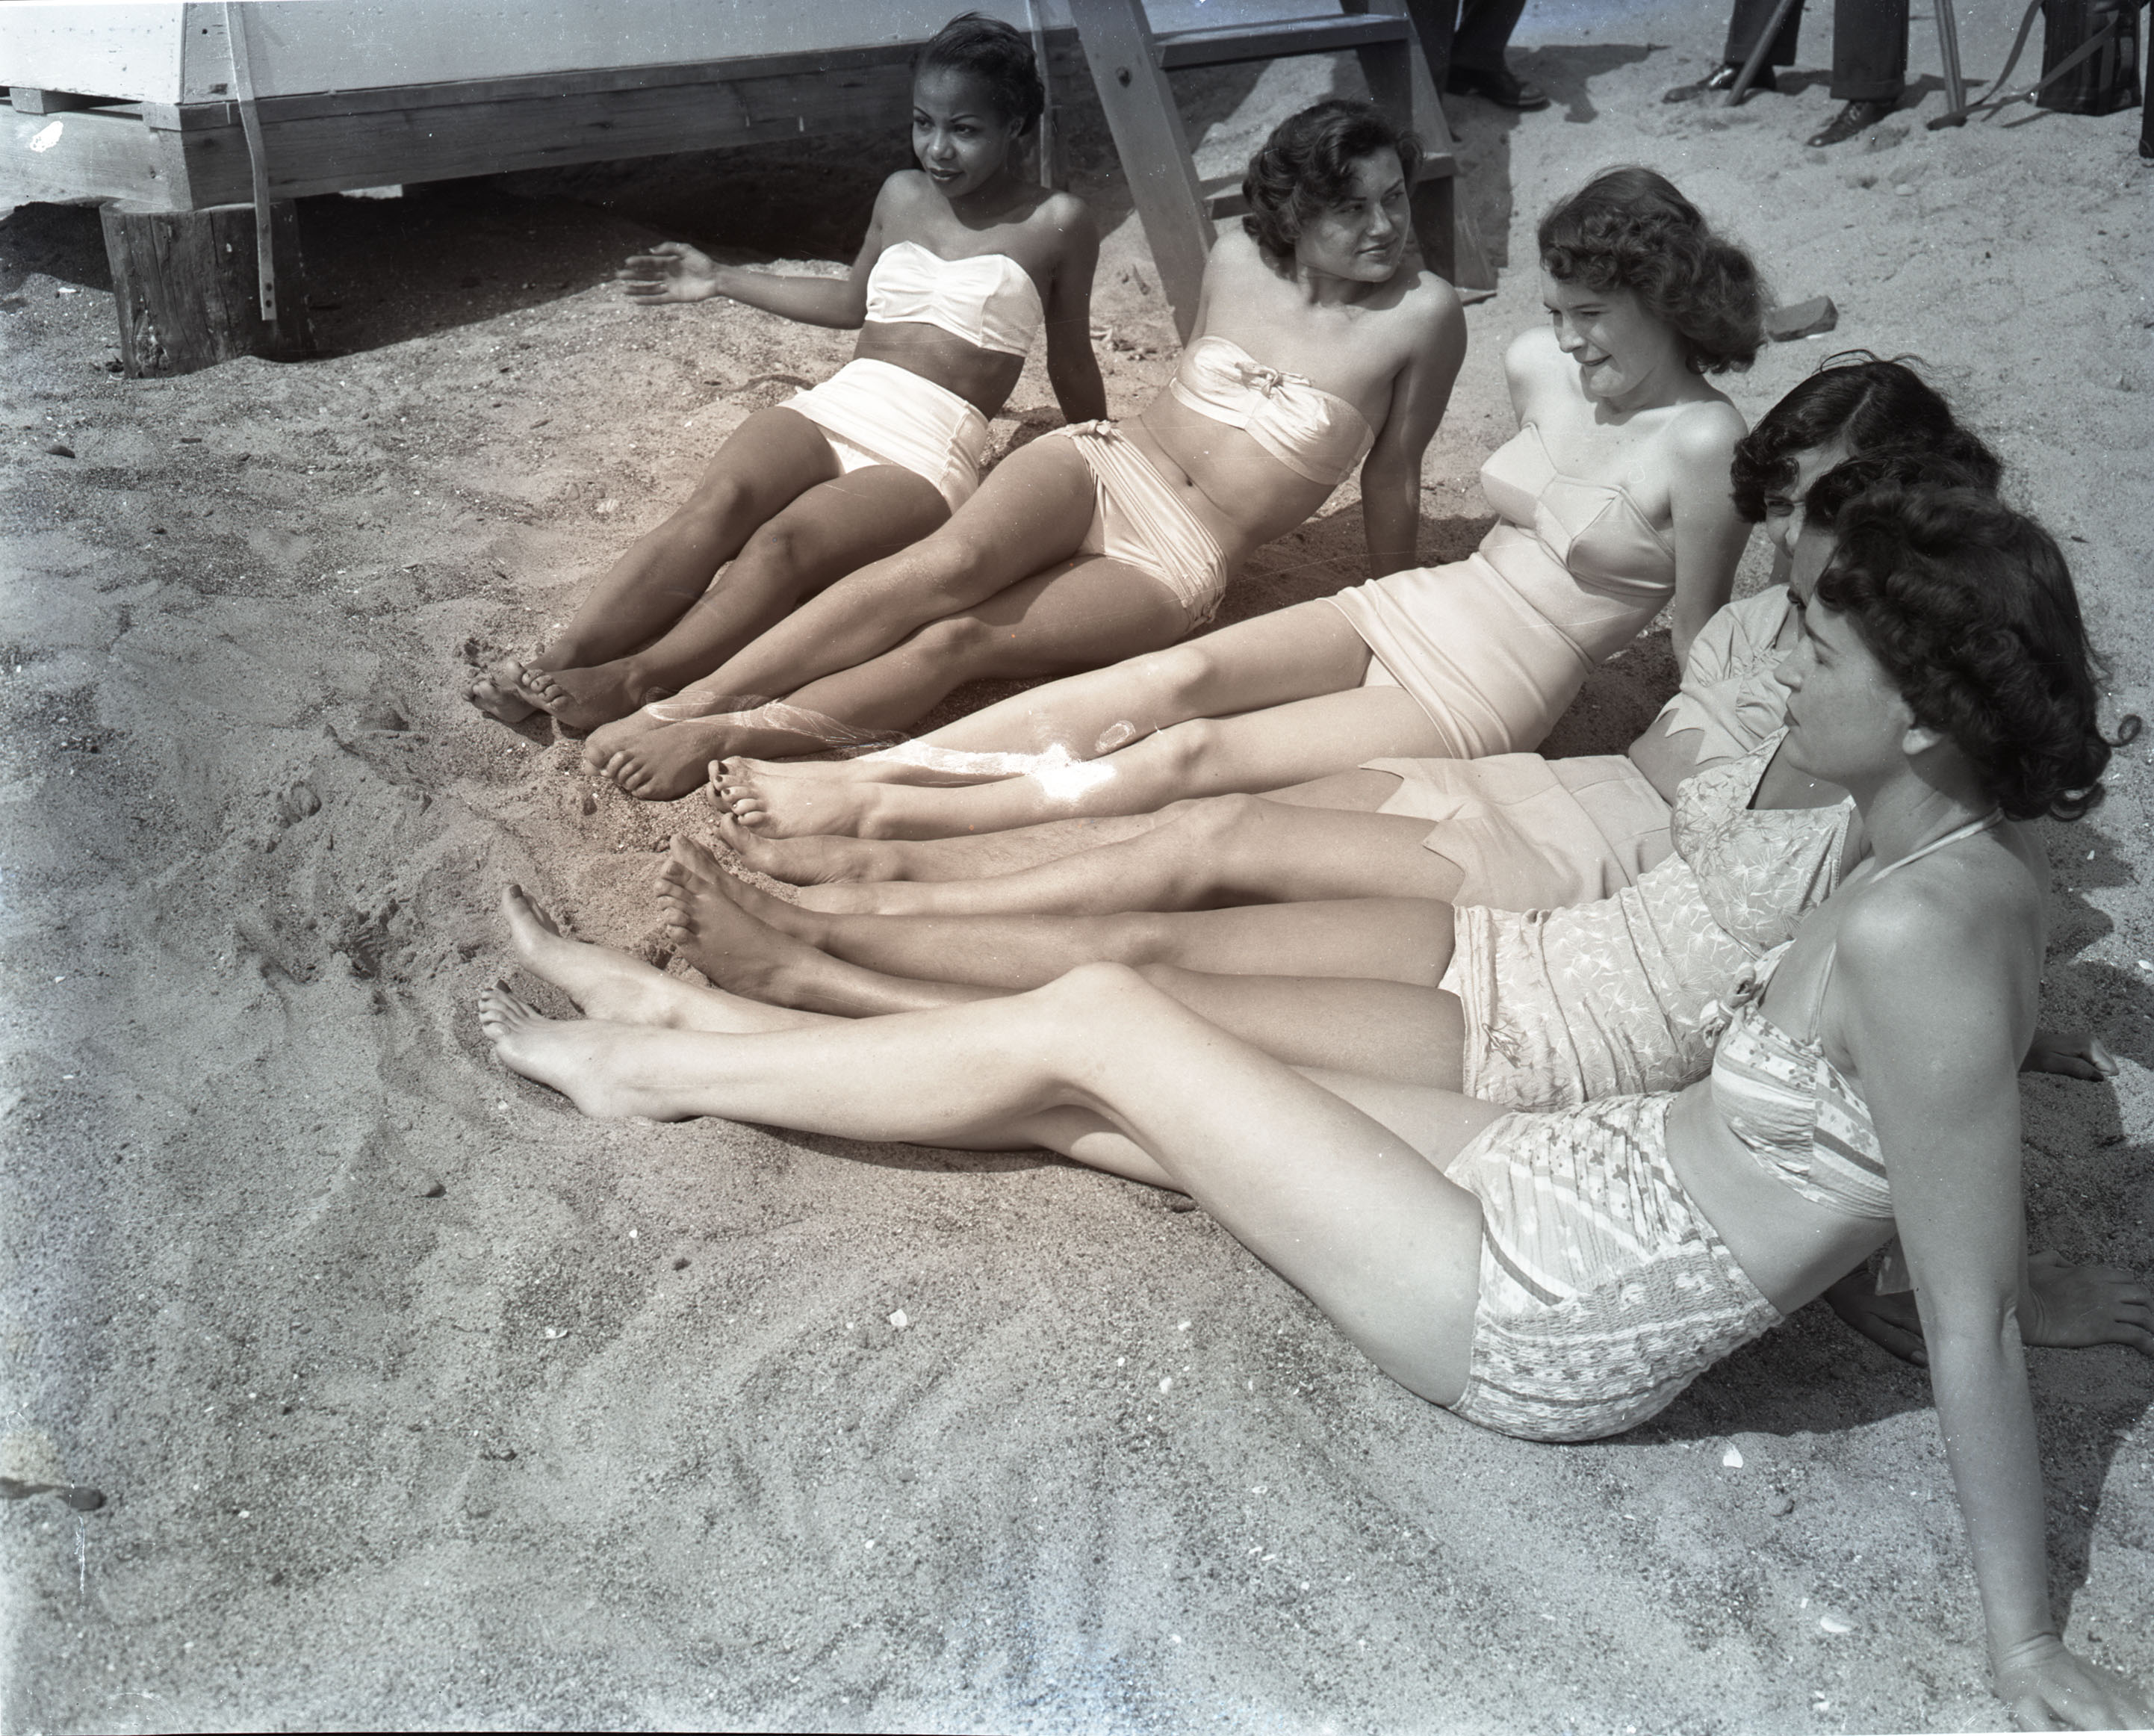 6 women in swimsuits sitting together on the sand